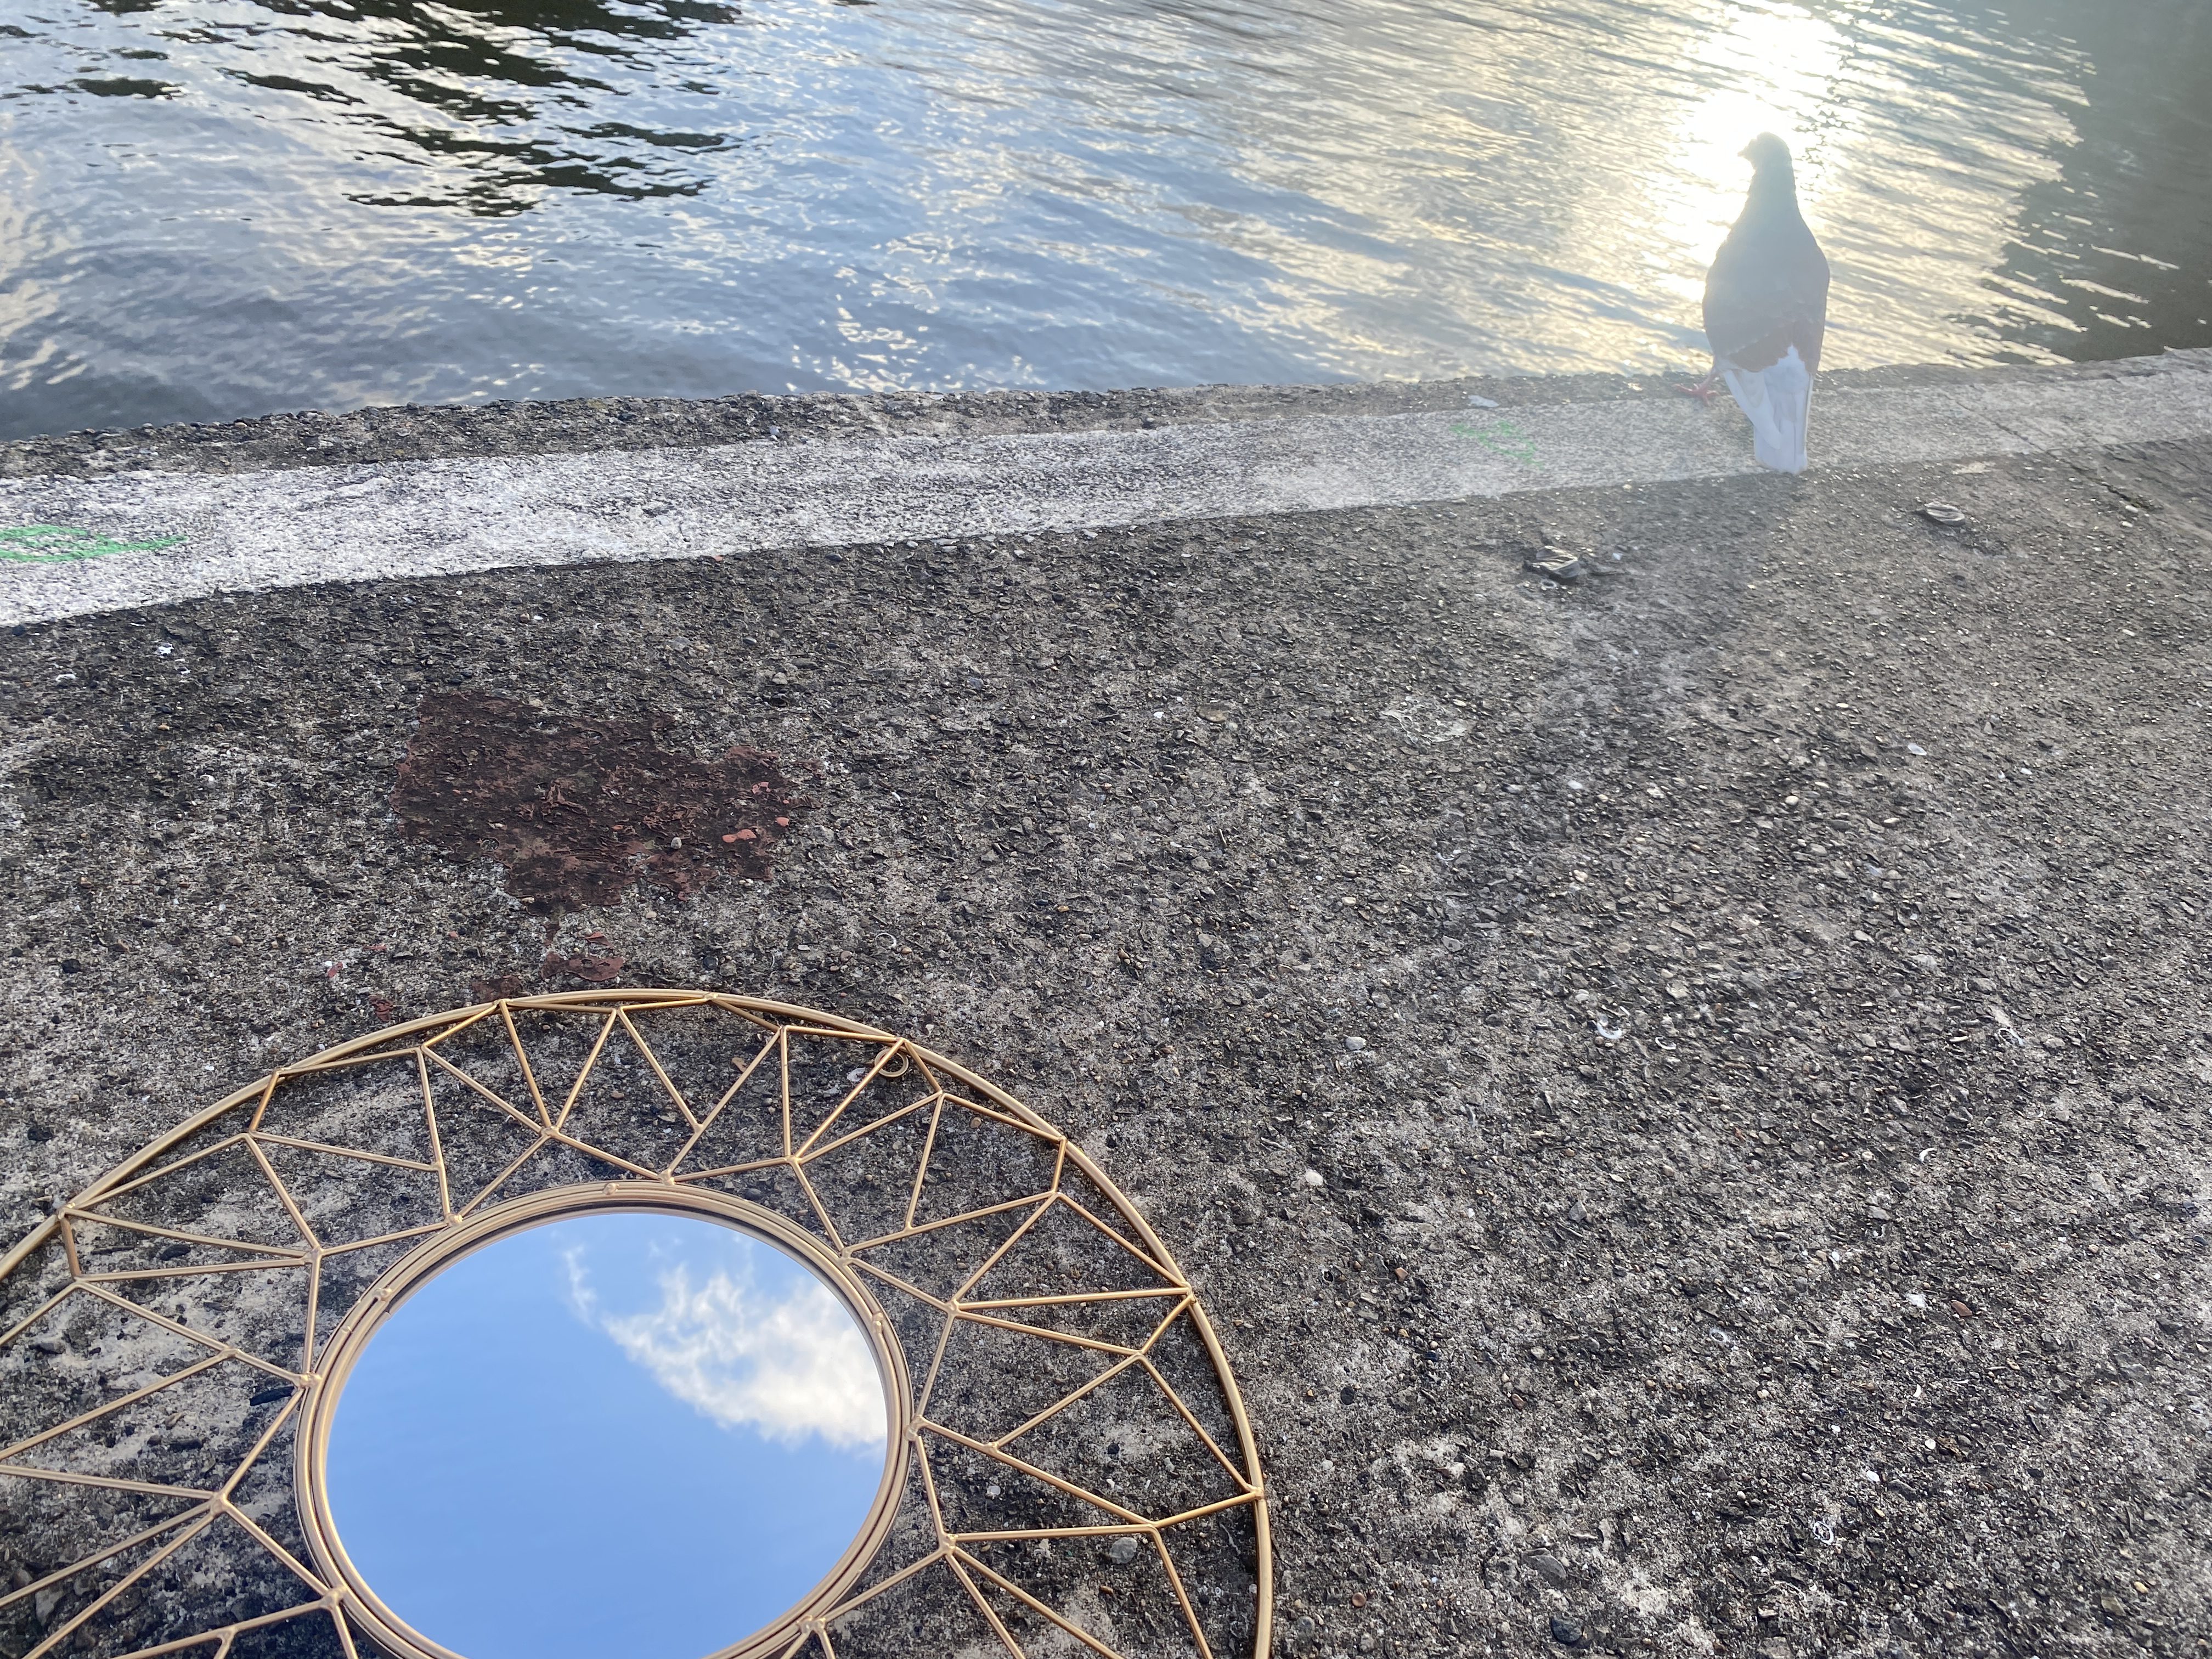 A colour photograph of a gold embellished frame with a mirror in the middle placed at the edge of a canal, with a pigeon on the right top corner.